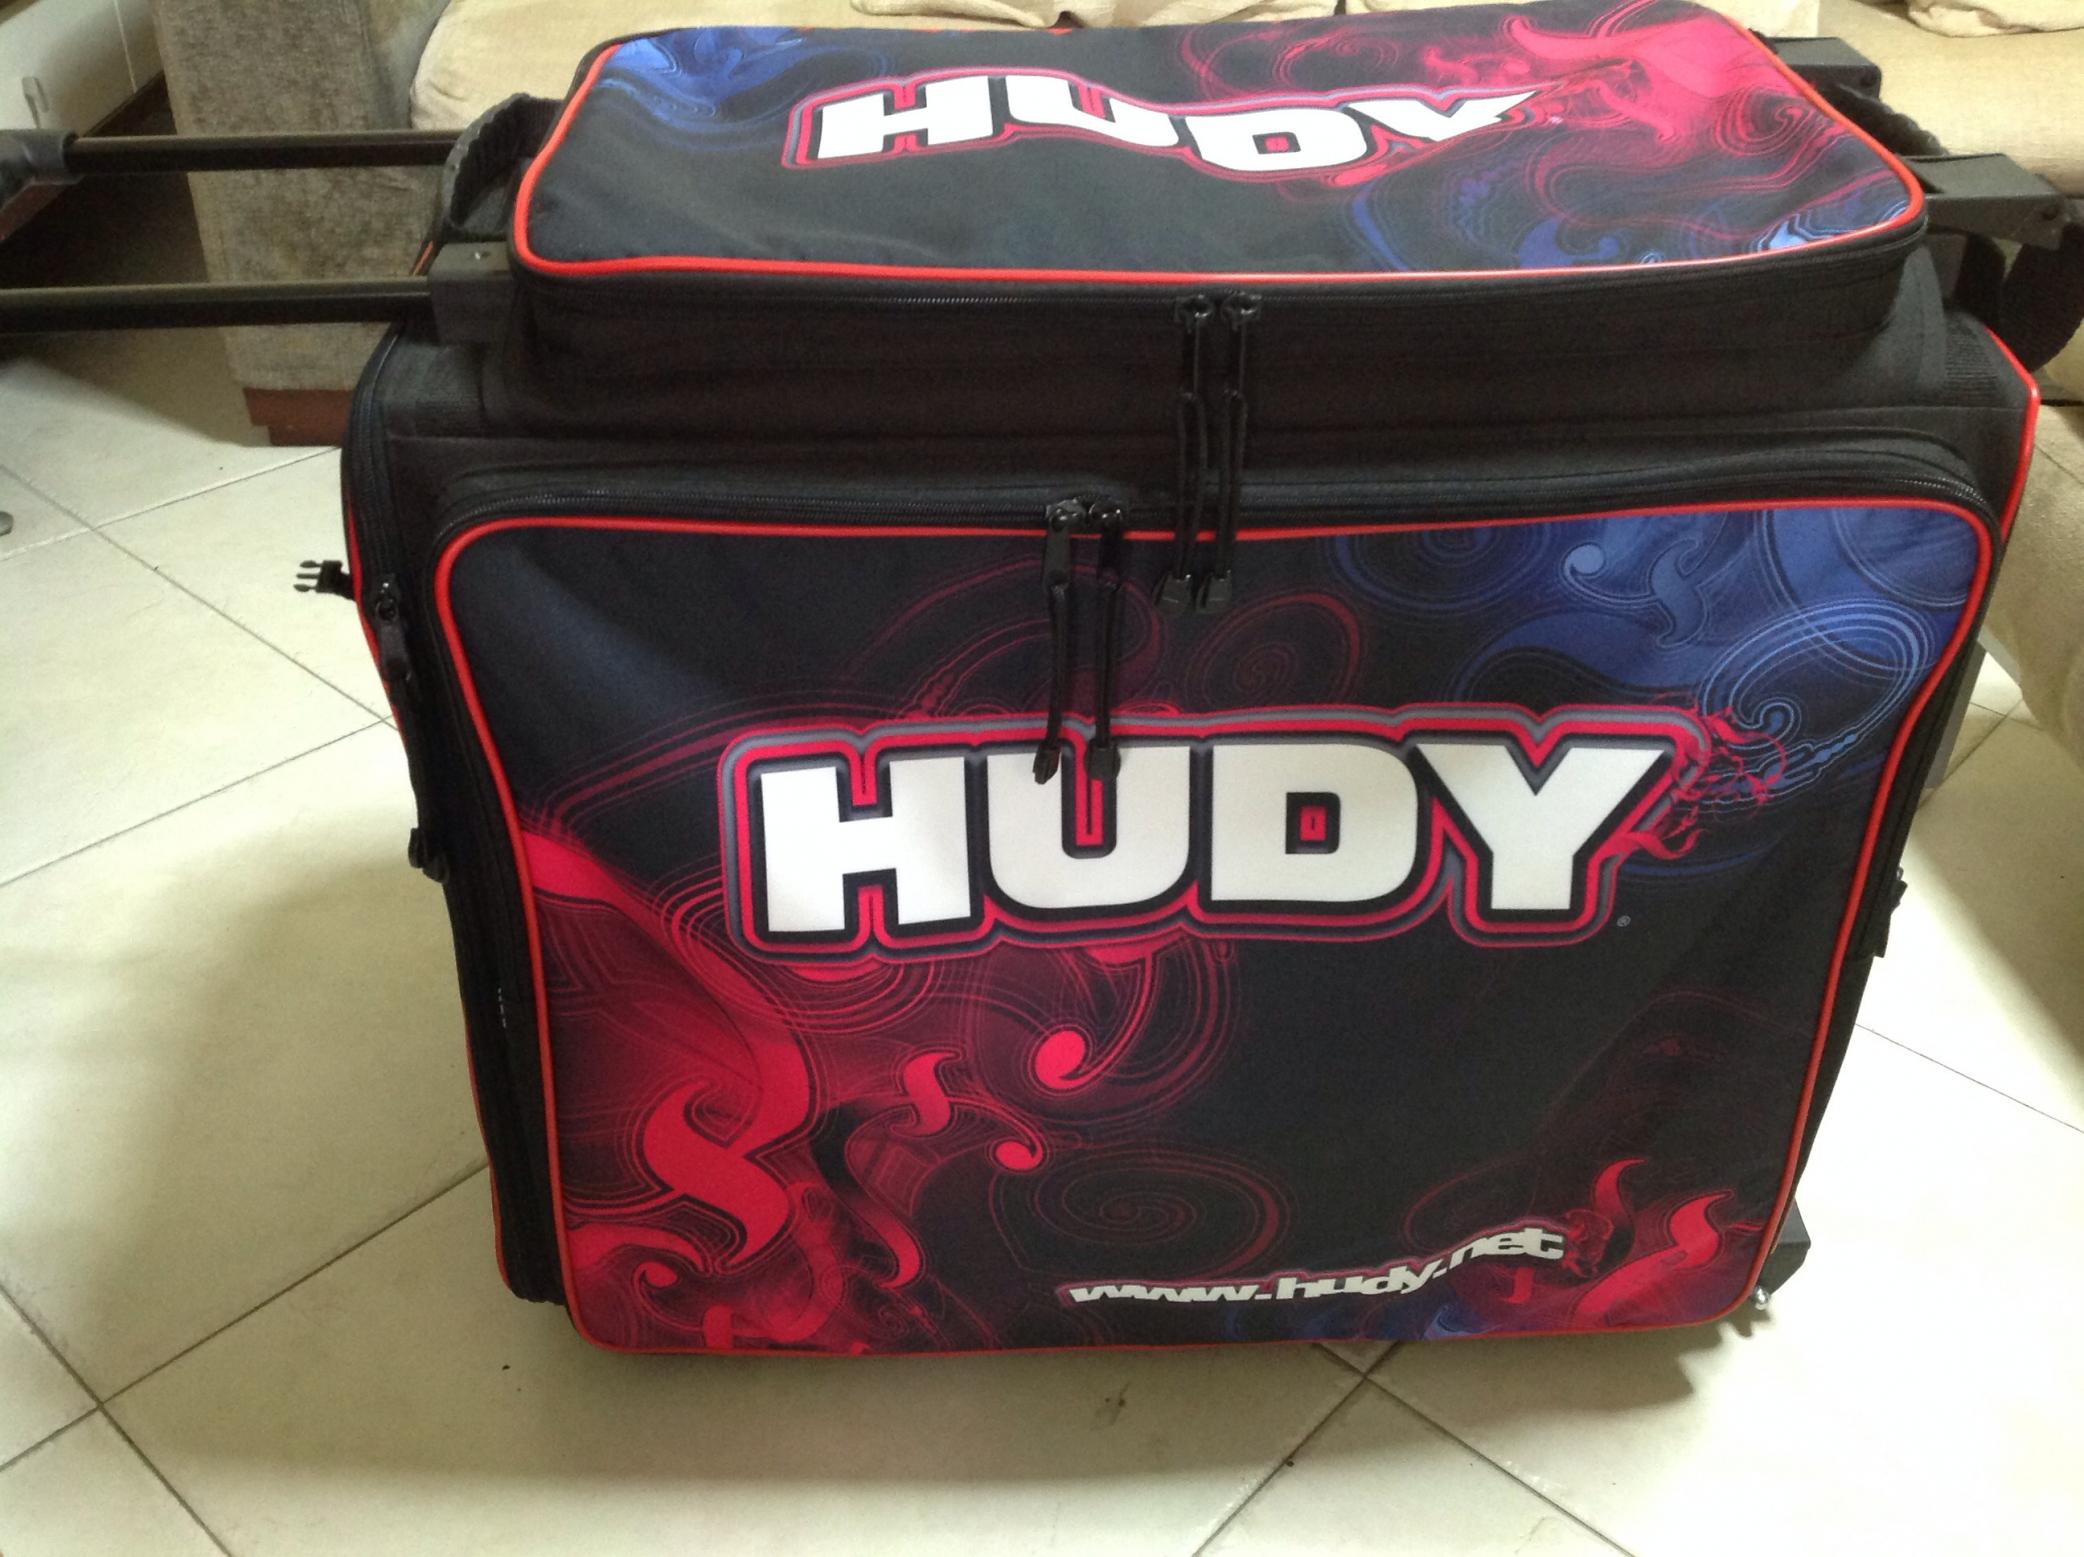 FOR SALE HUDY Trolley bag for 1/10 and 1/8 scale cars - R/C Tech Forums